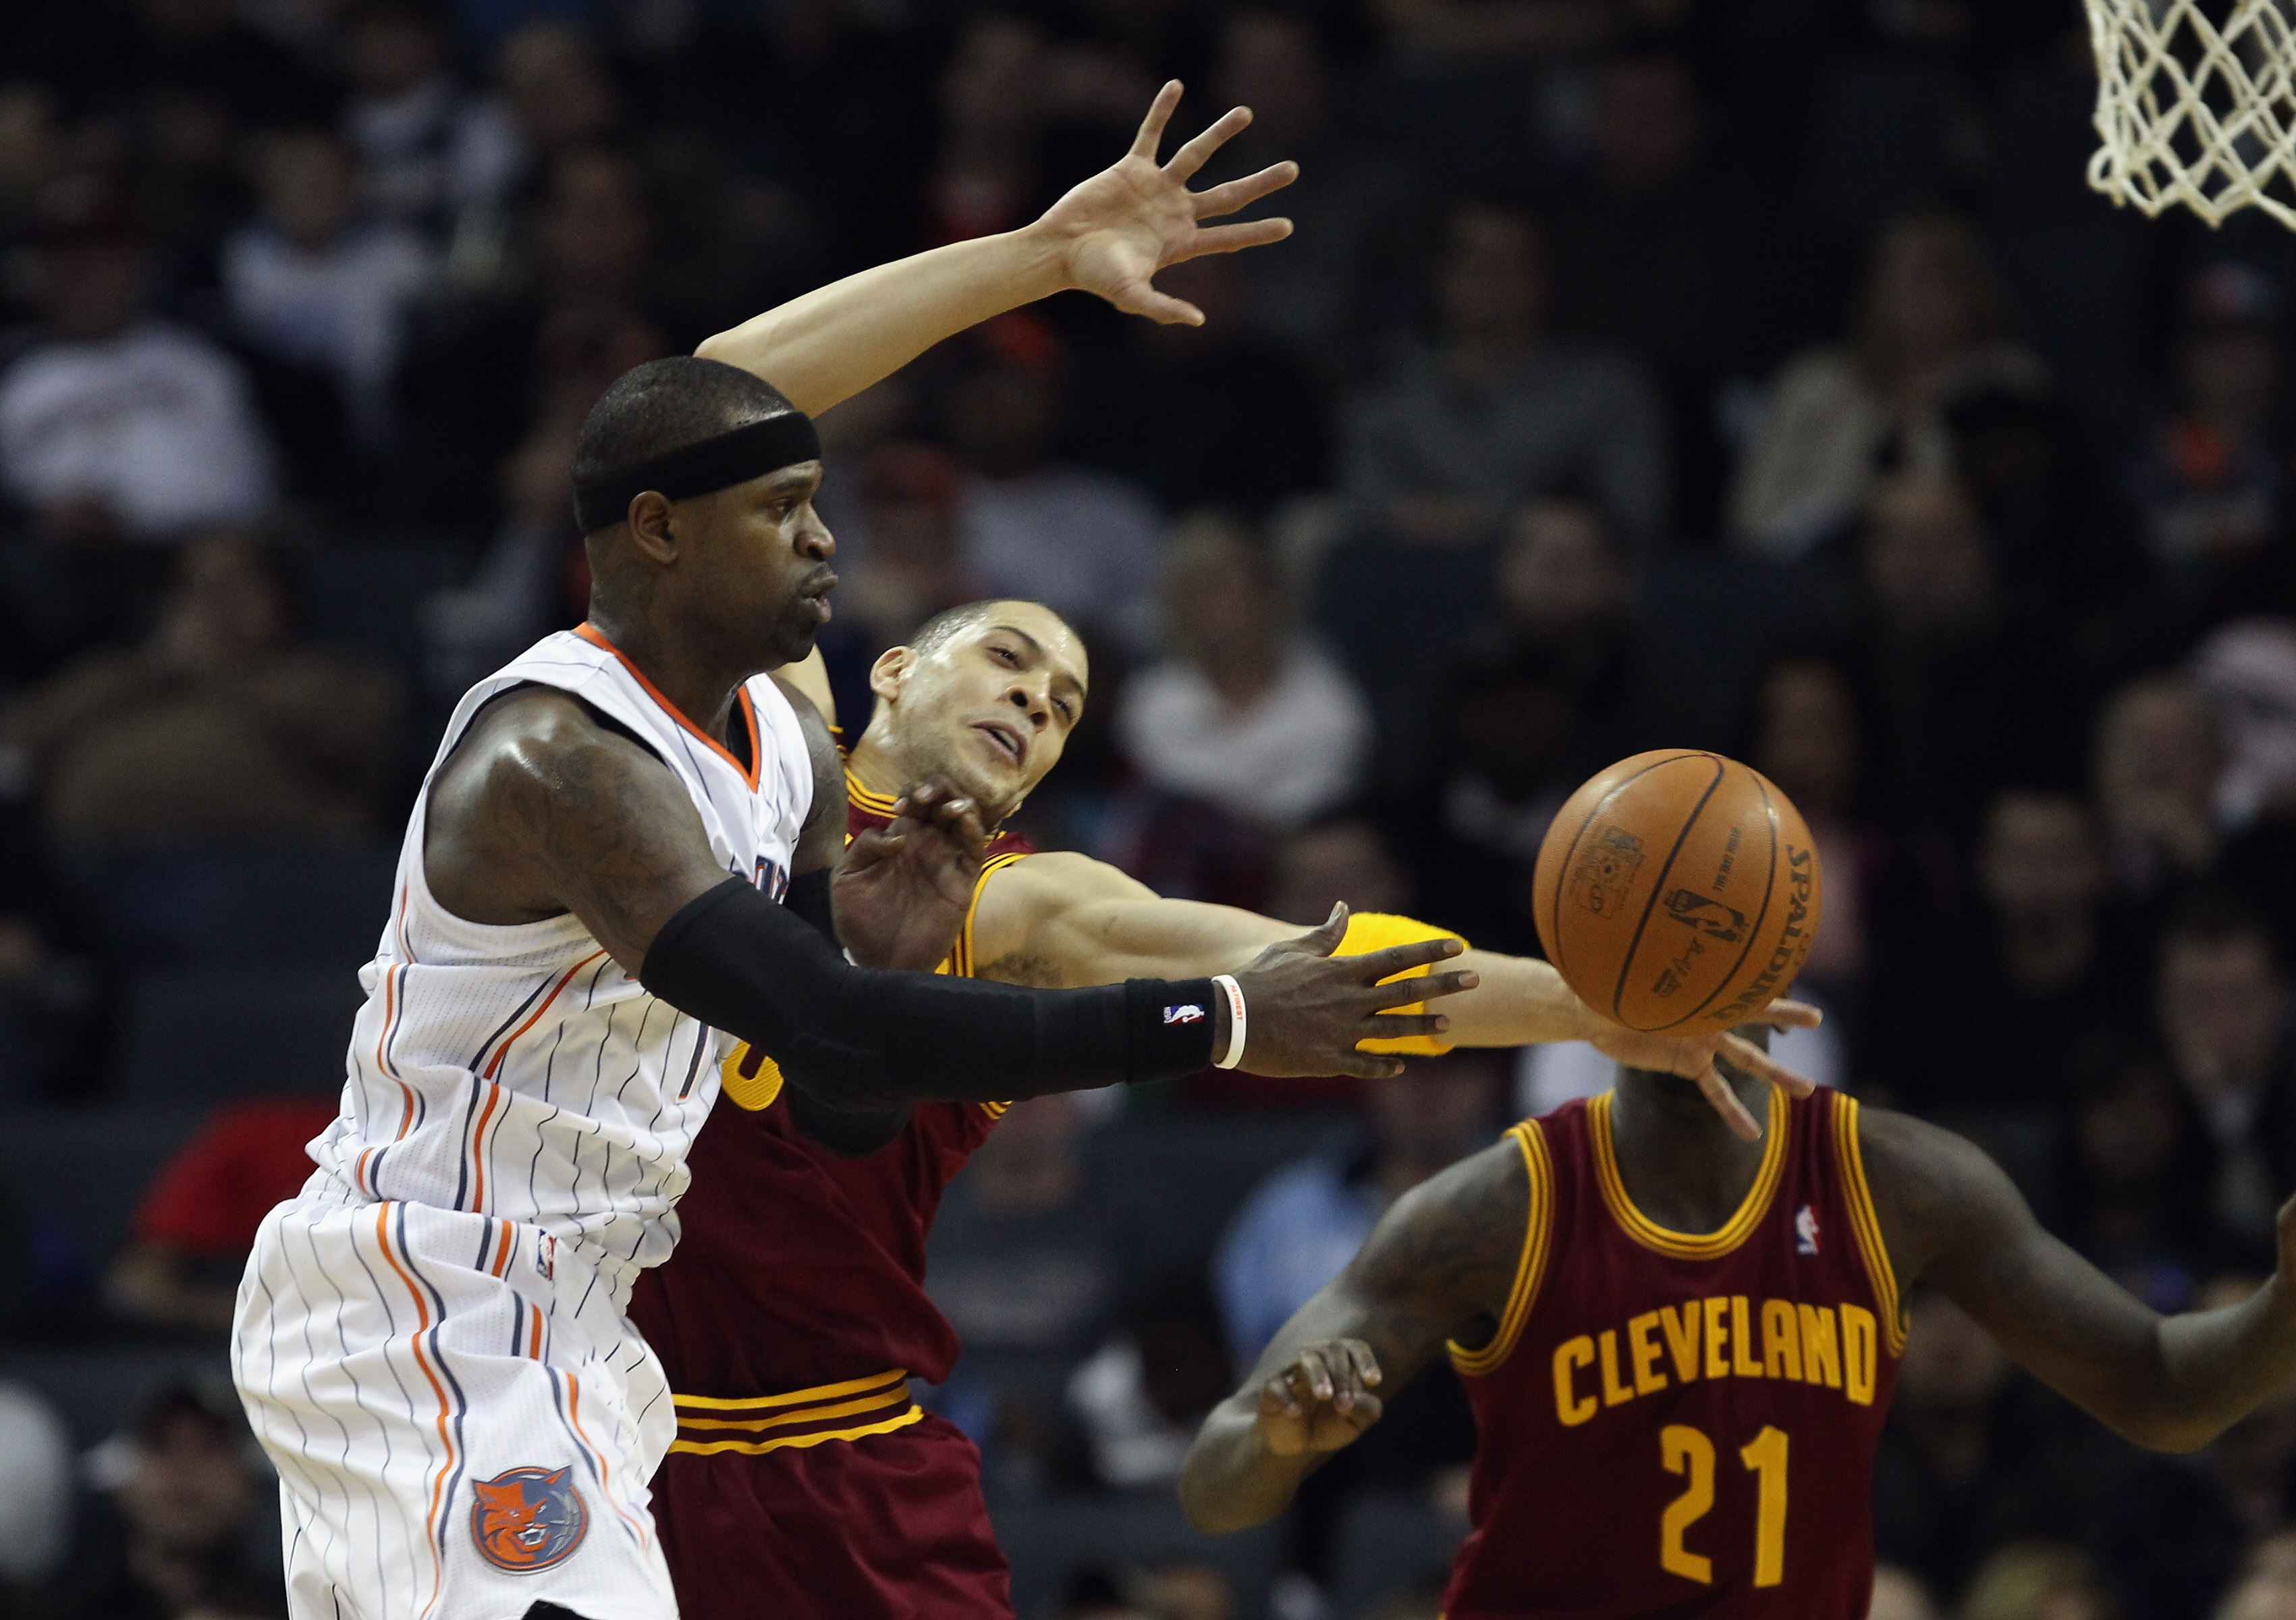 CHARLOTTE, NC - DECEMBER 29:  Anthony Parker #18 of the Cleveland Cavaliers tries to stop Stephen Jackson #1 of the Charlotte Bobcats during their game at Time Warner Cable Arena on December 29, 2010 in Charlotte, North Carolina. NOTE TO USER: User expres